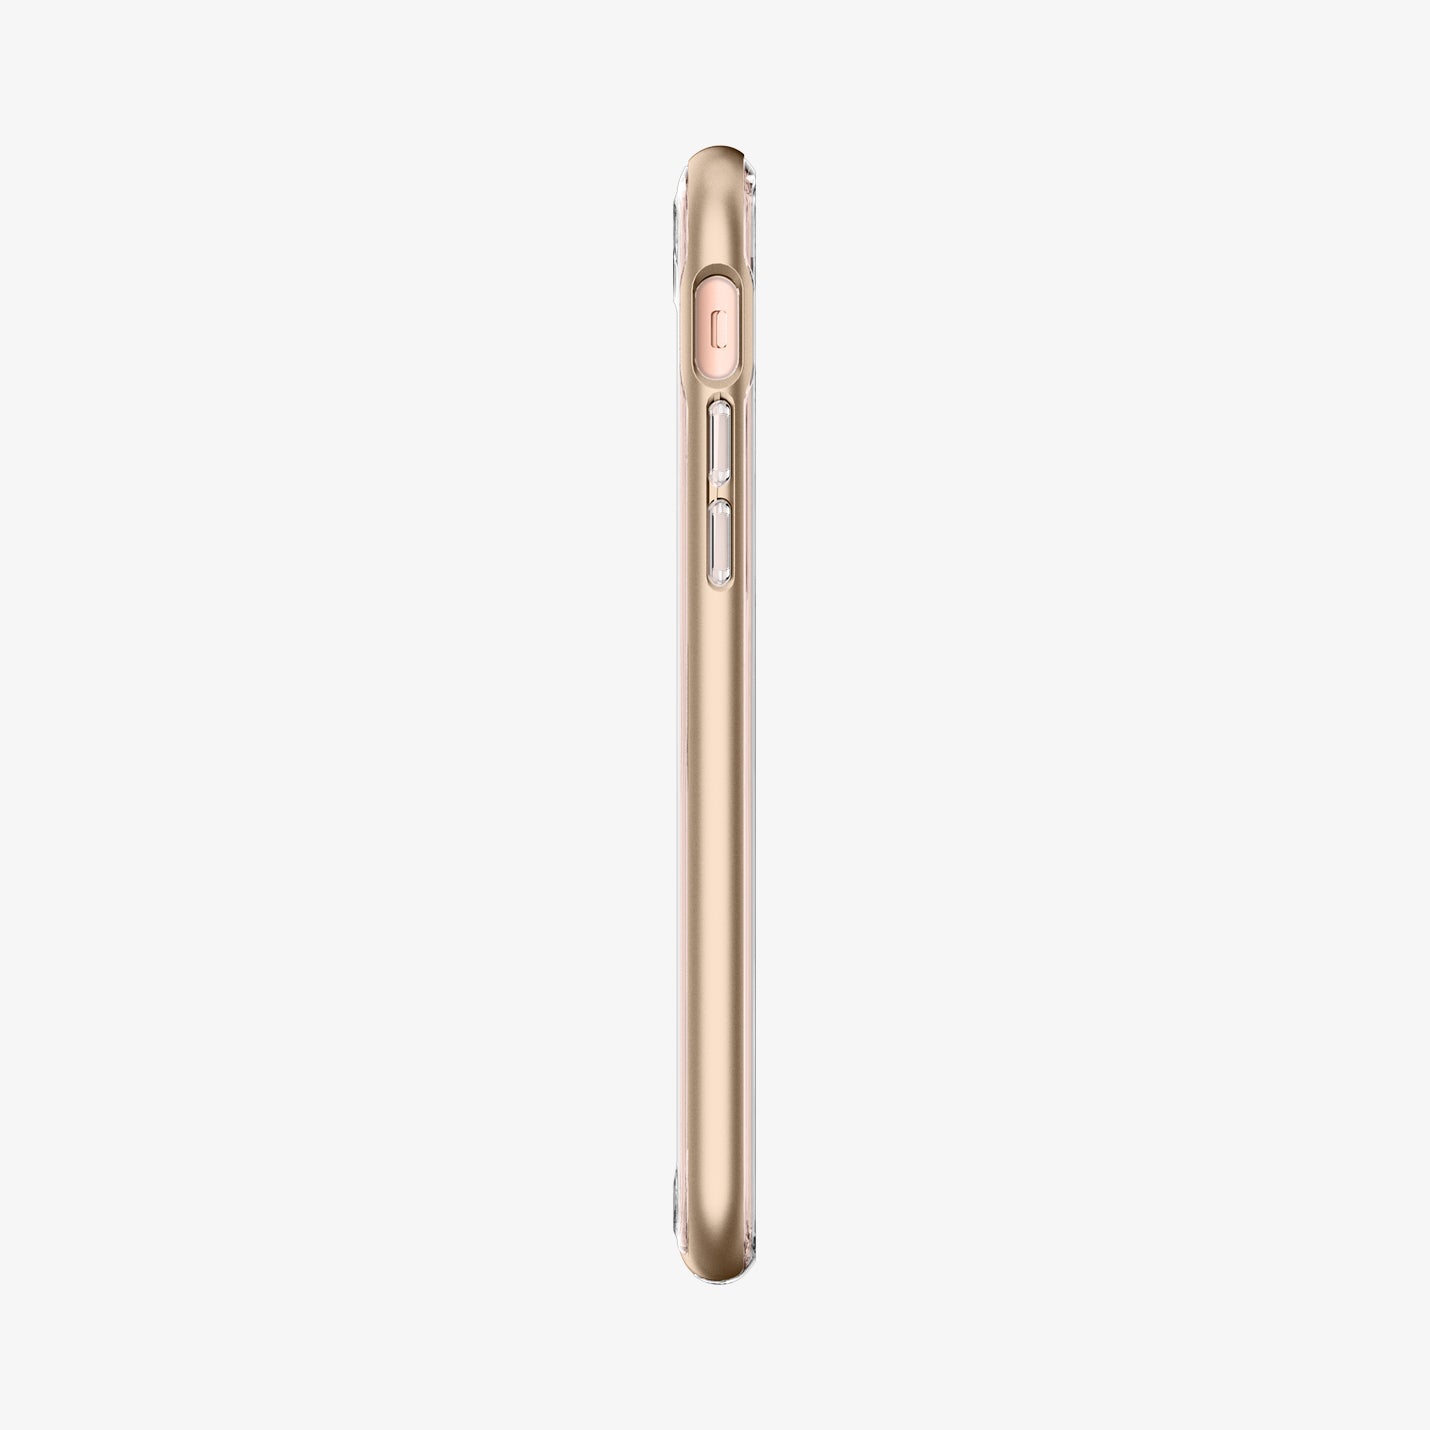 054CS22366 - iPhone 8 Series Neo Hybrid Crystal Case in champagne gold showing the side